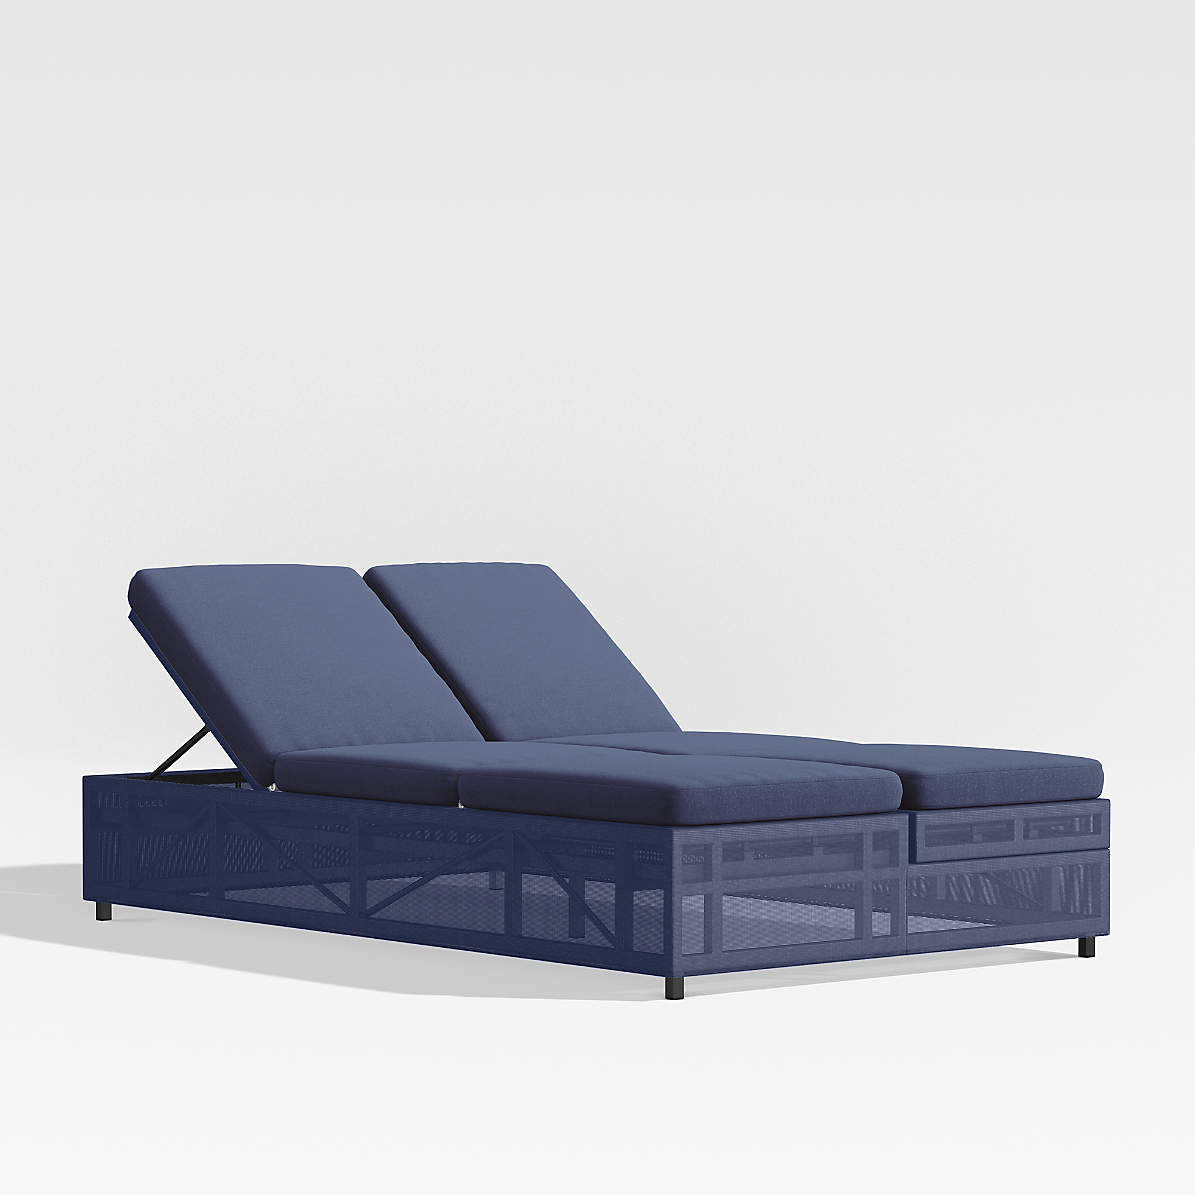 Double Outdoor Patio Chaise Sofa Lounge, Outdoor Double Lounger